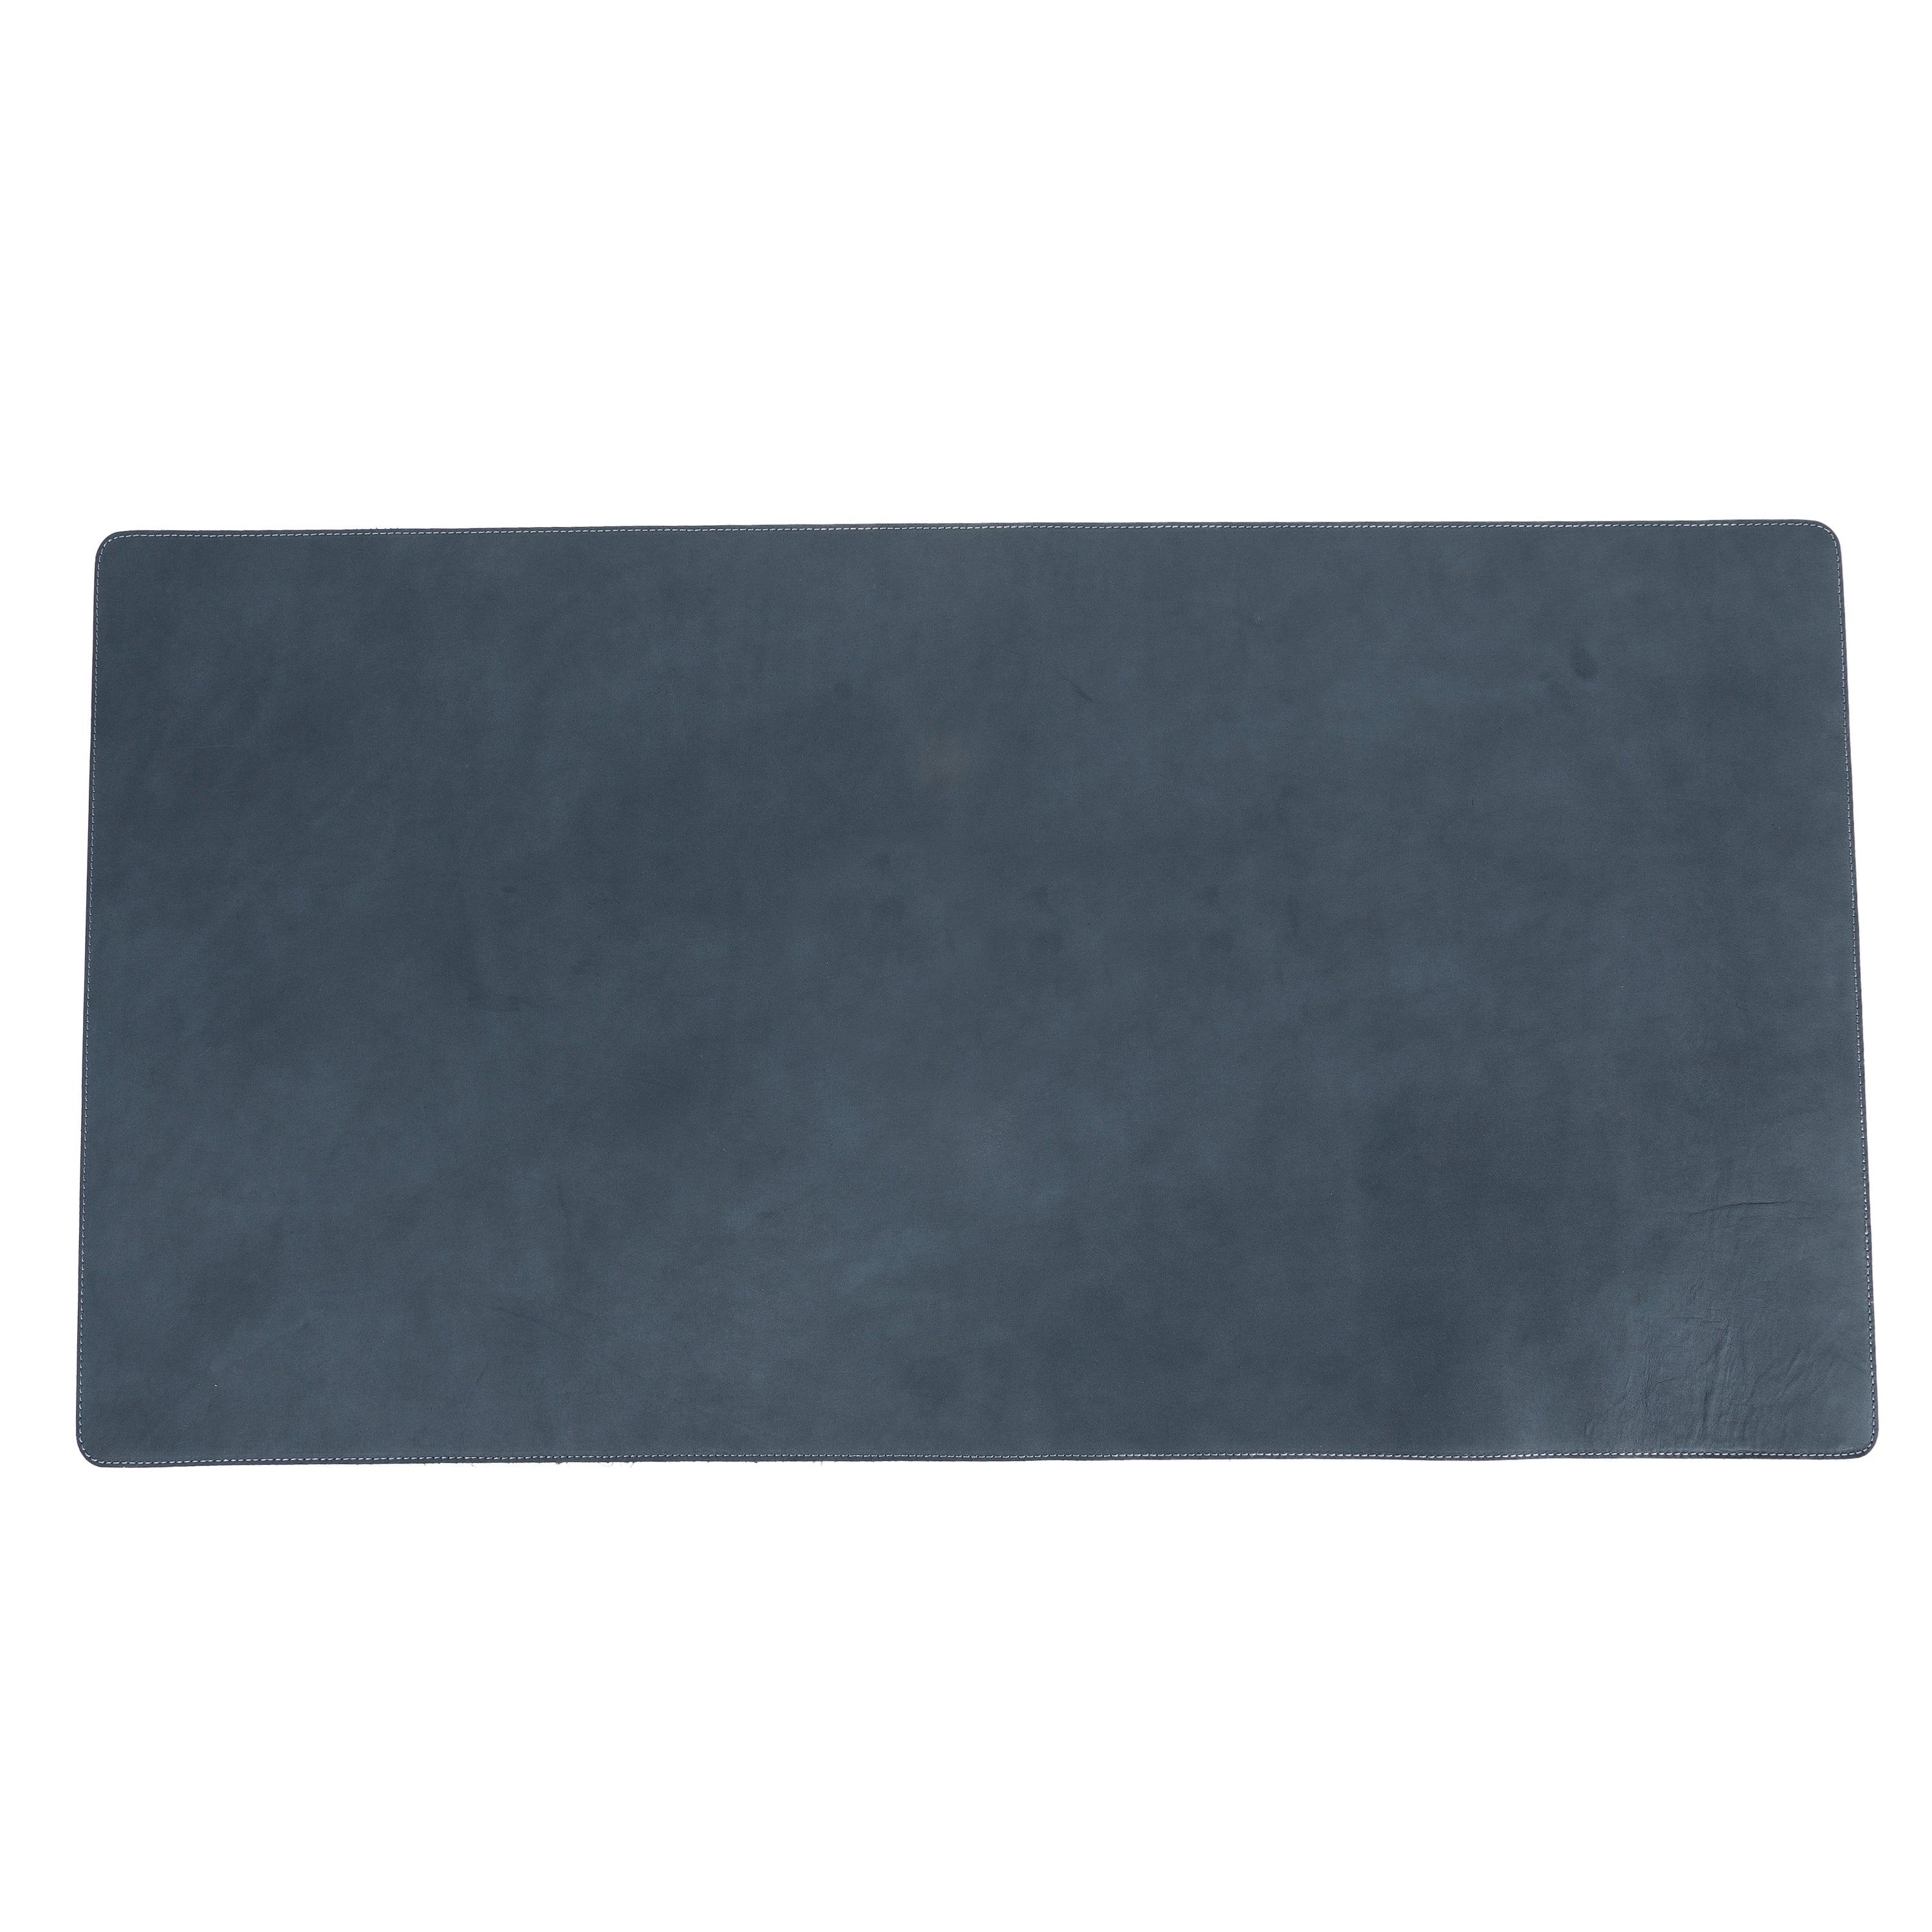 LupinnyLeather Genuine Blue Leather Deskmat, Computer Pad, Office Desk Pad 3